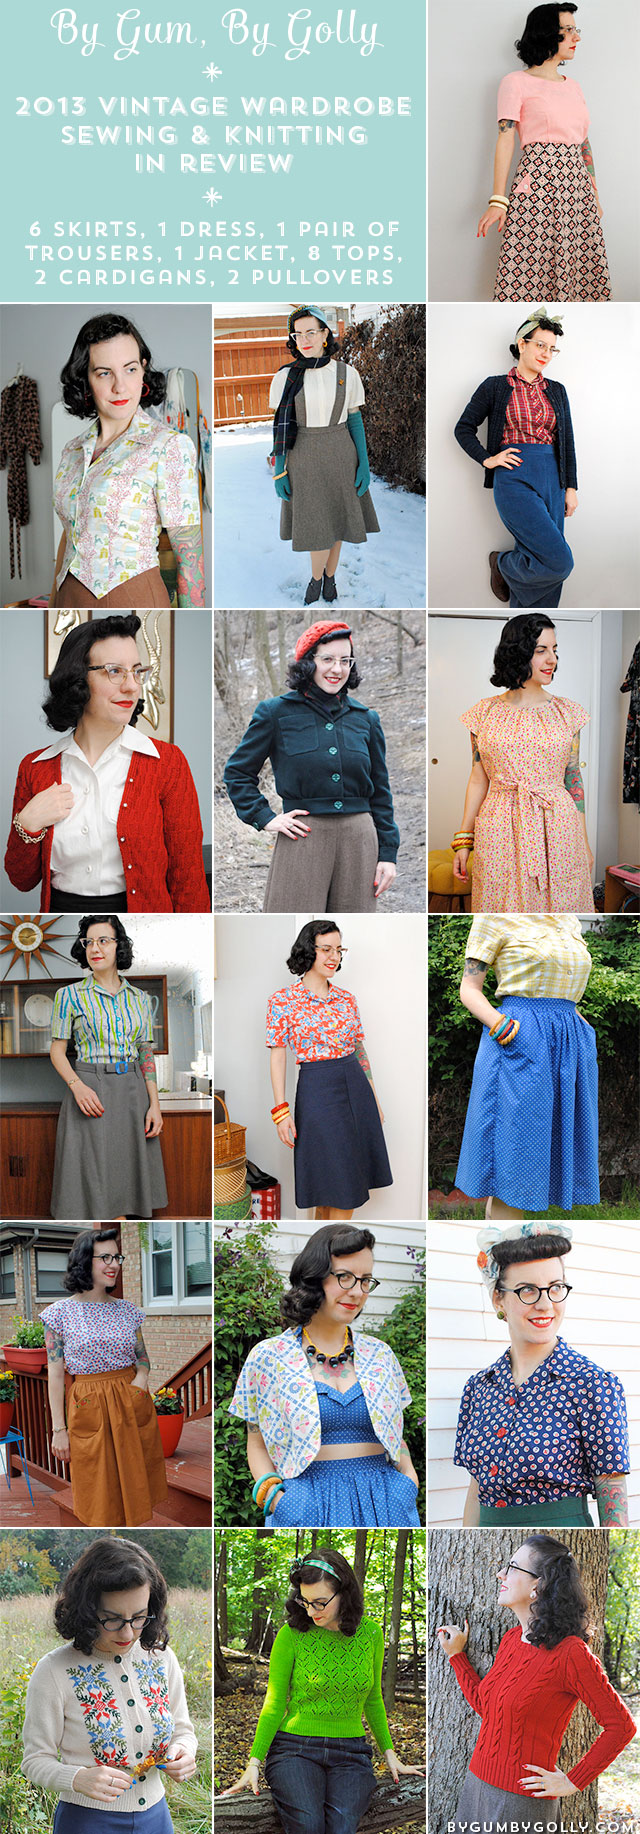 By Gum, By Golly's 2013 vintage sewing & knitting projects